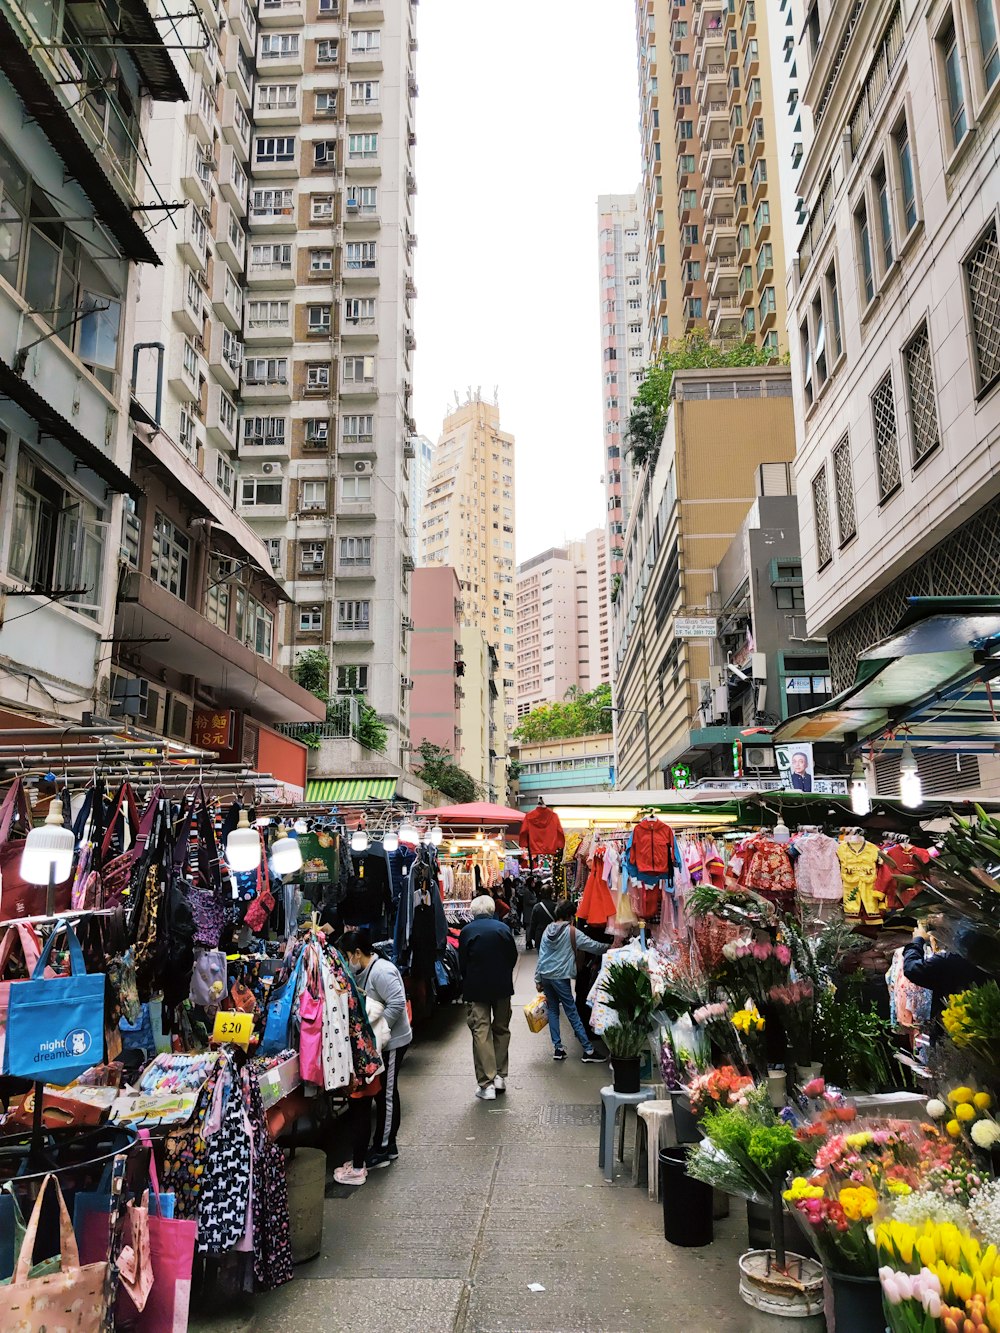 a street market with people shopping in it